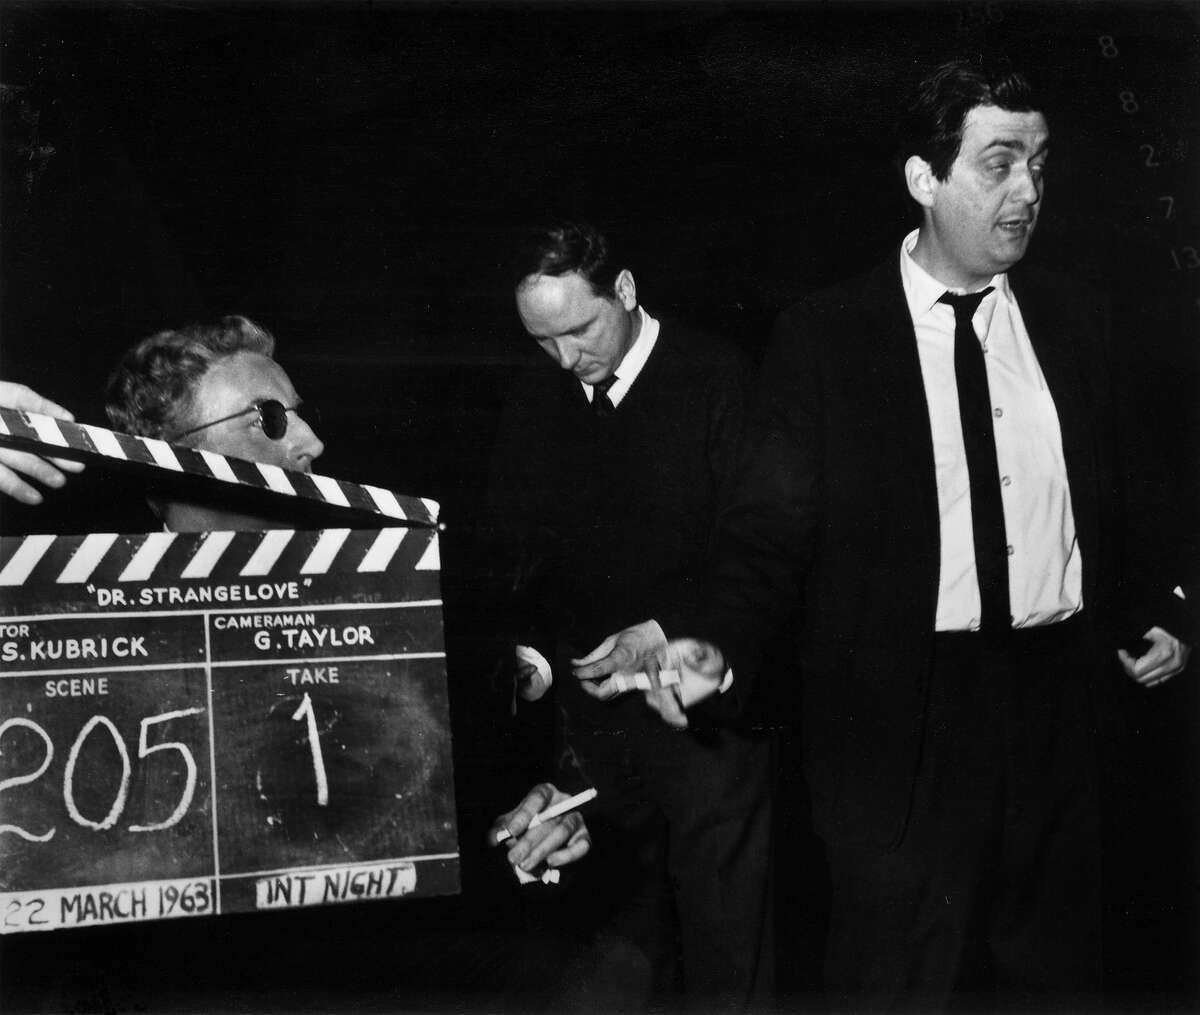 Peter Sellers, left, and director Stanley Kubrick, right, with a clapperboard during the filming of 'Dr Strangelove or How I Learned to Stop Worrying and Love the Bomb'.